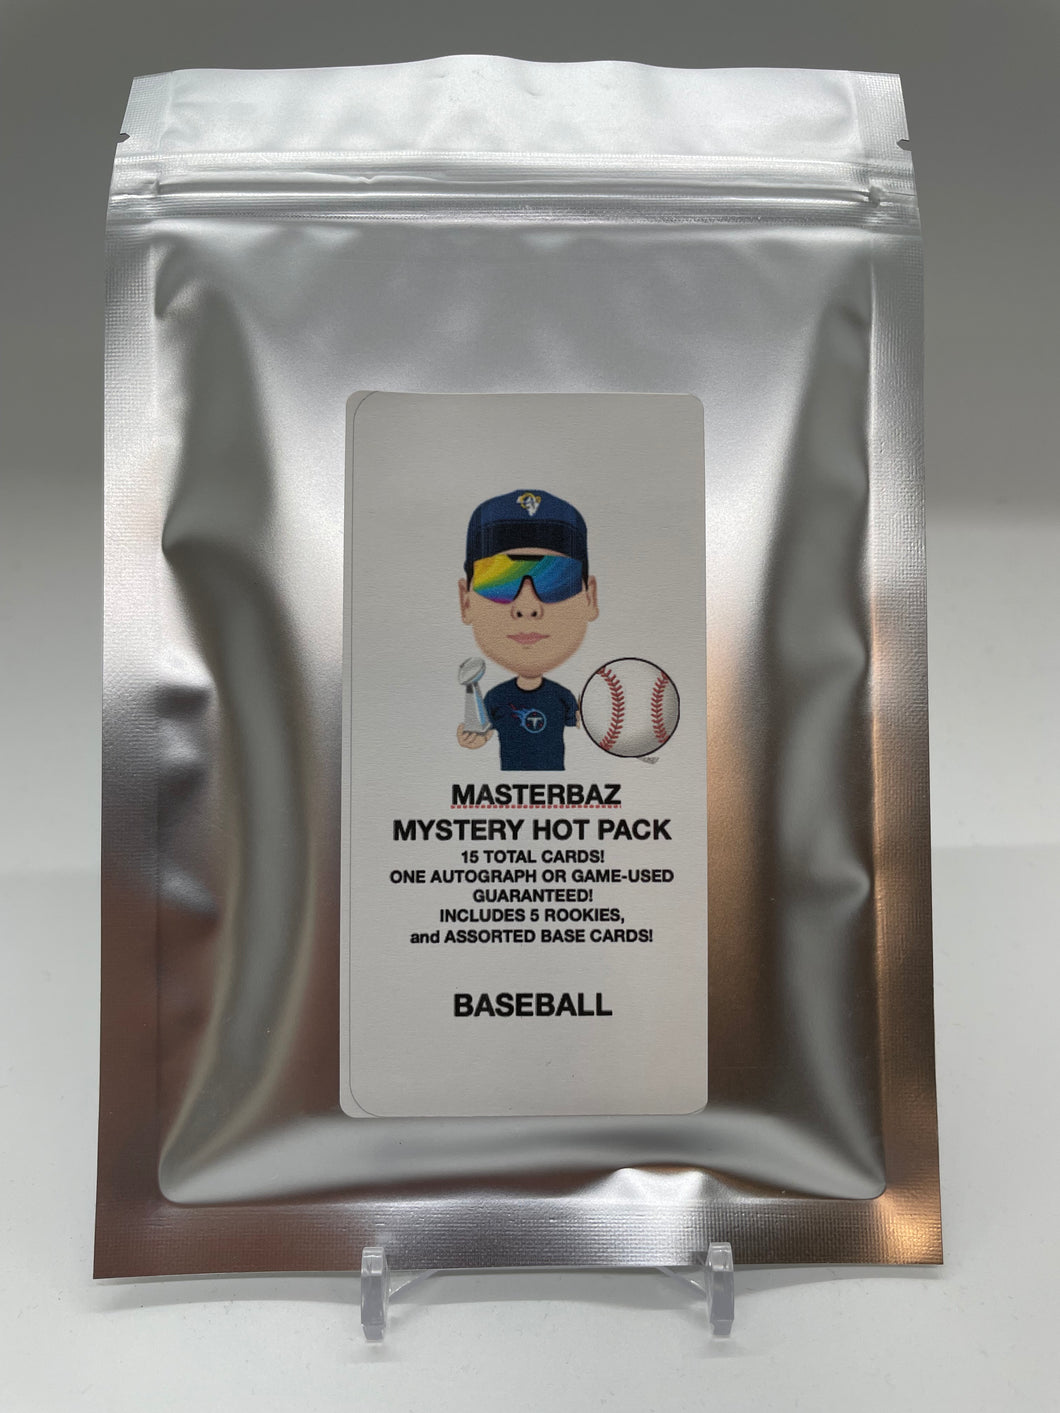 MASTERBAZ MYSTERY HOT PACK - Super Fan Cave